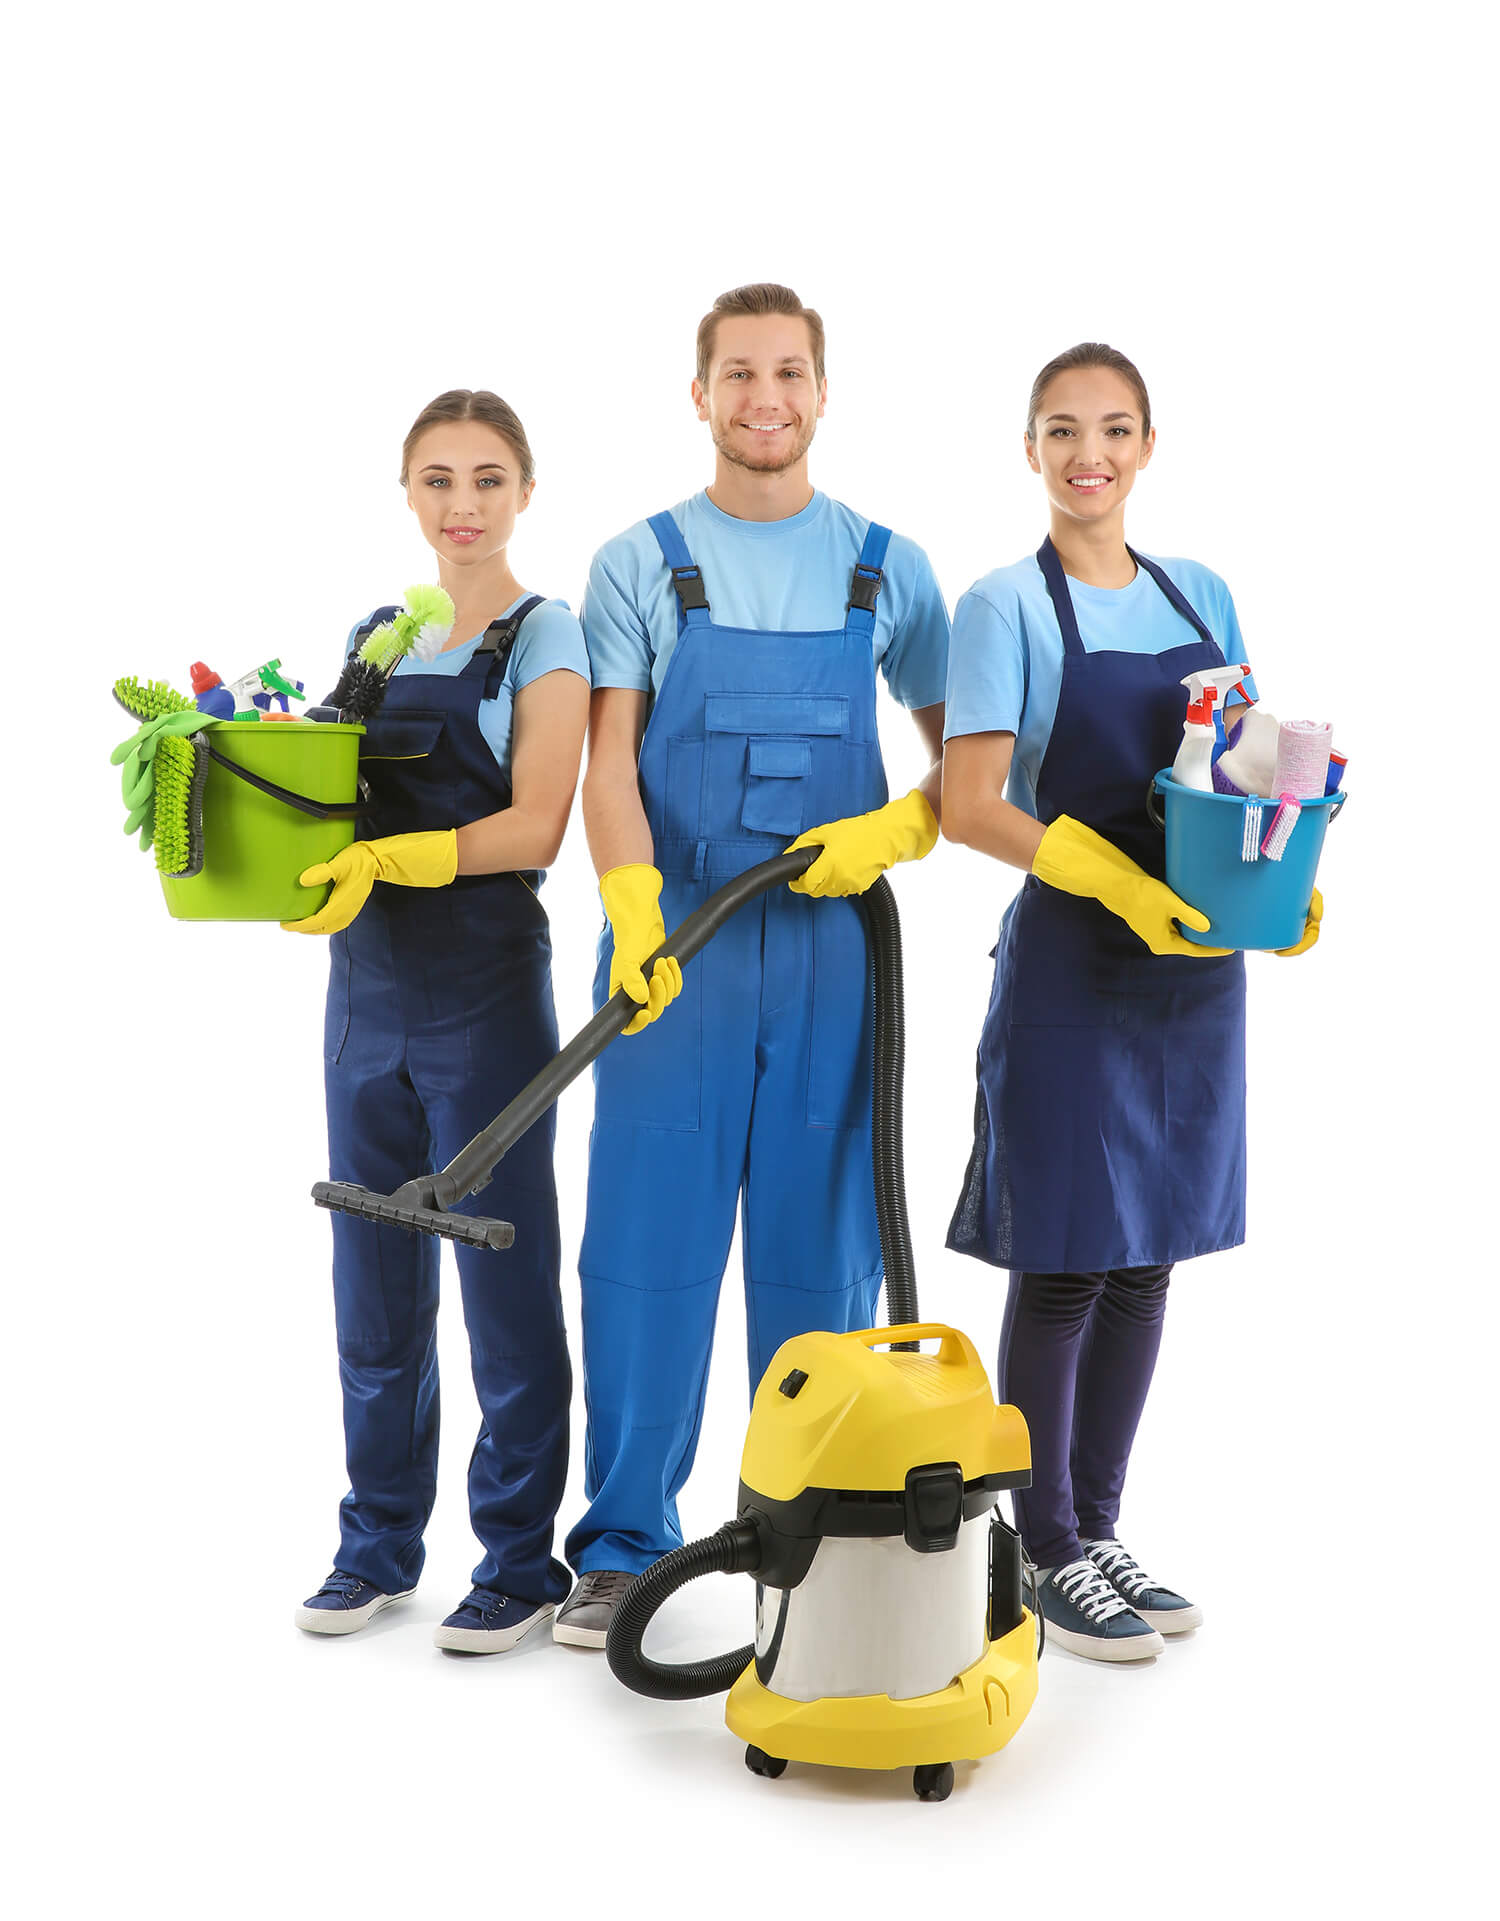 About Us Cloud 9 Cleaning - Brisbane, Bayside Commercial Cleaning Services